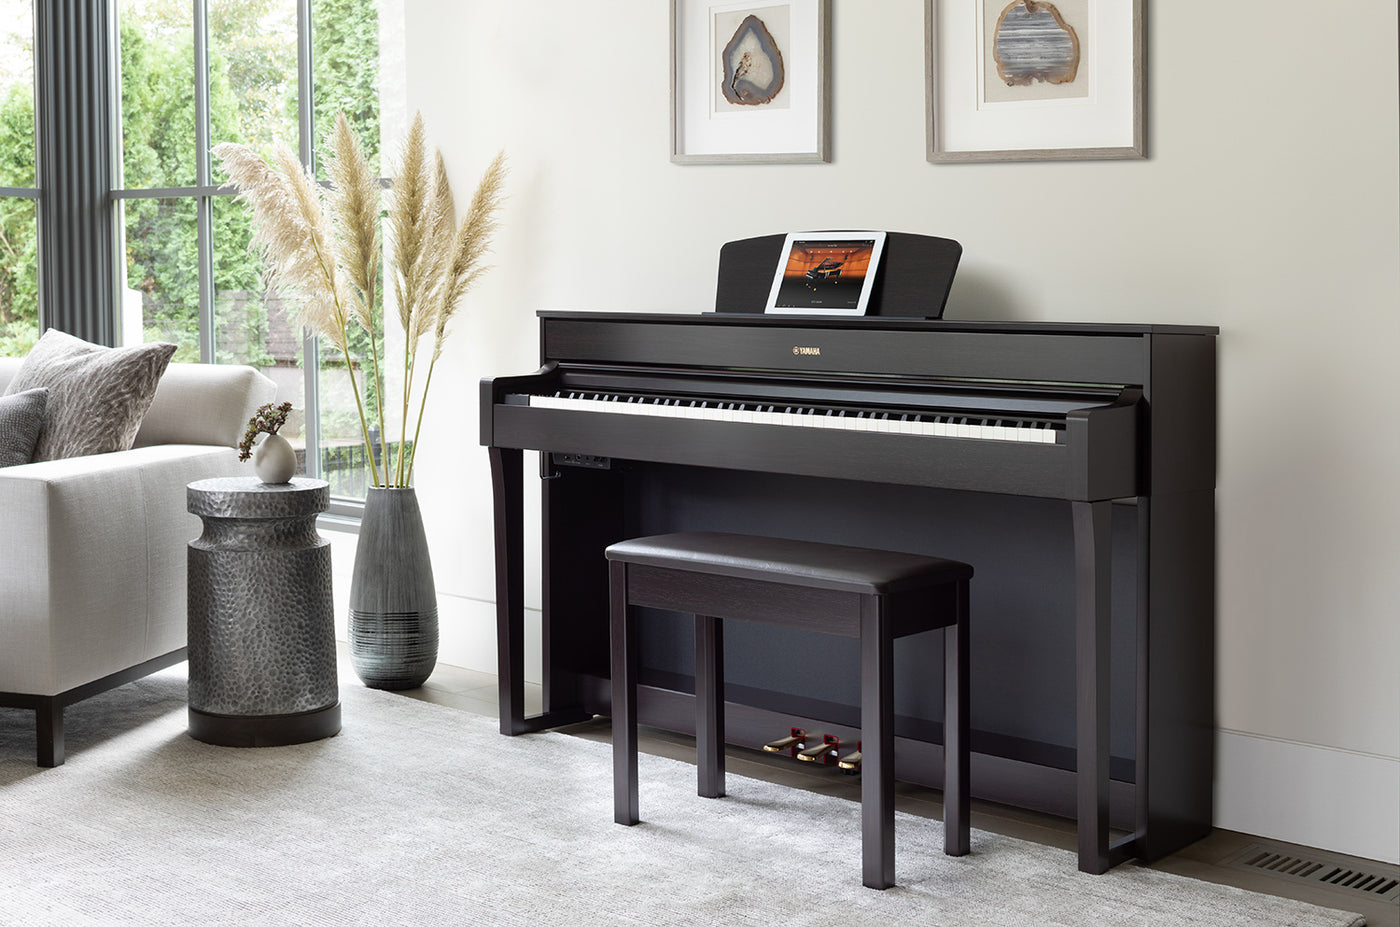 A modern black upright piano with a matching piano stool set in a bright room with large windows, framed wall art, and decorative elements, exemplifying a contemporary home setting.